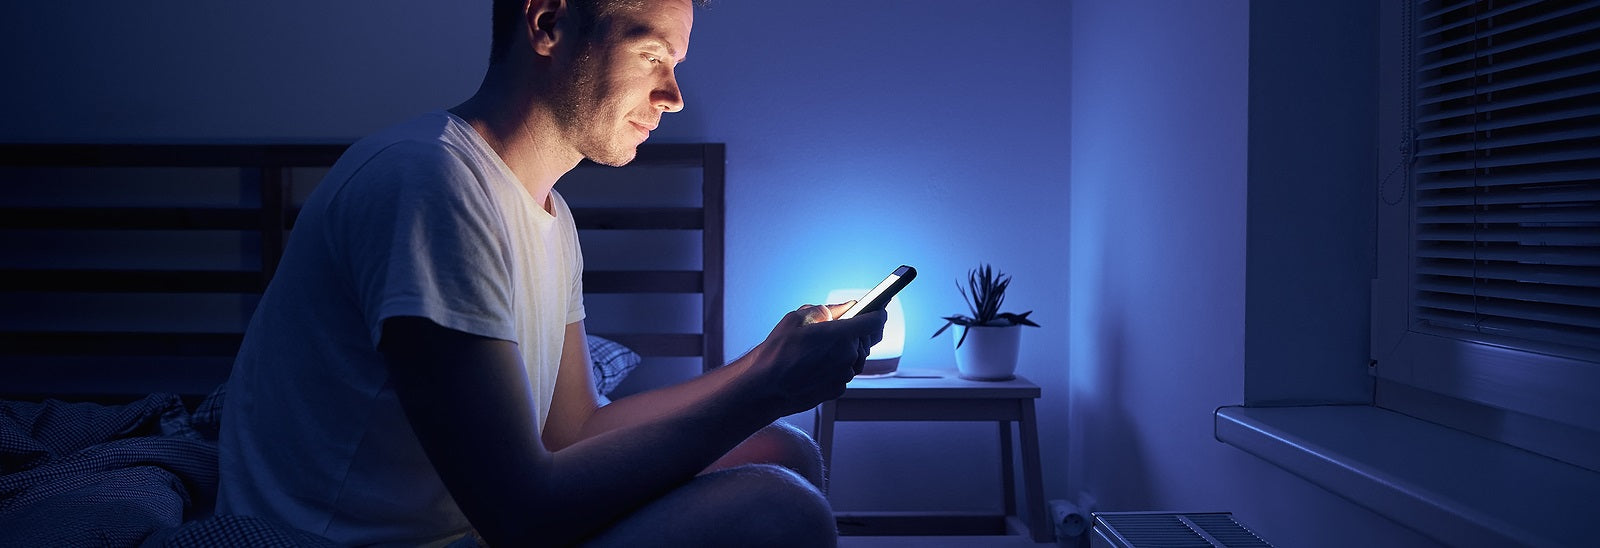 Why You Should Stop Using Your Smartphone Before Bed and How to Do It